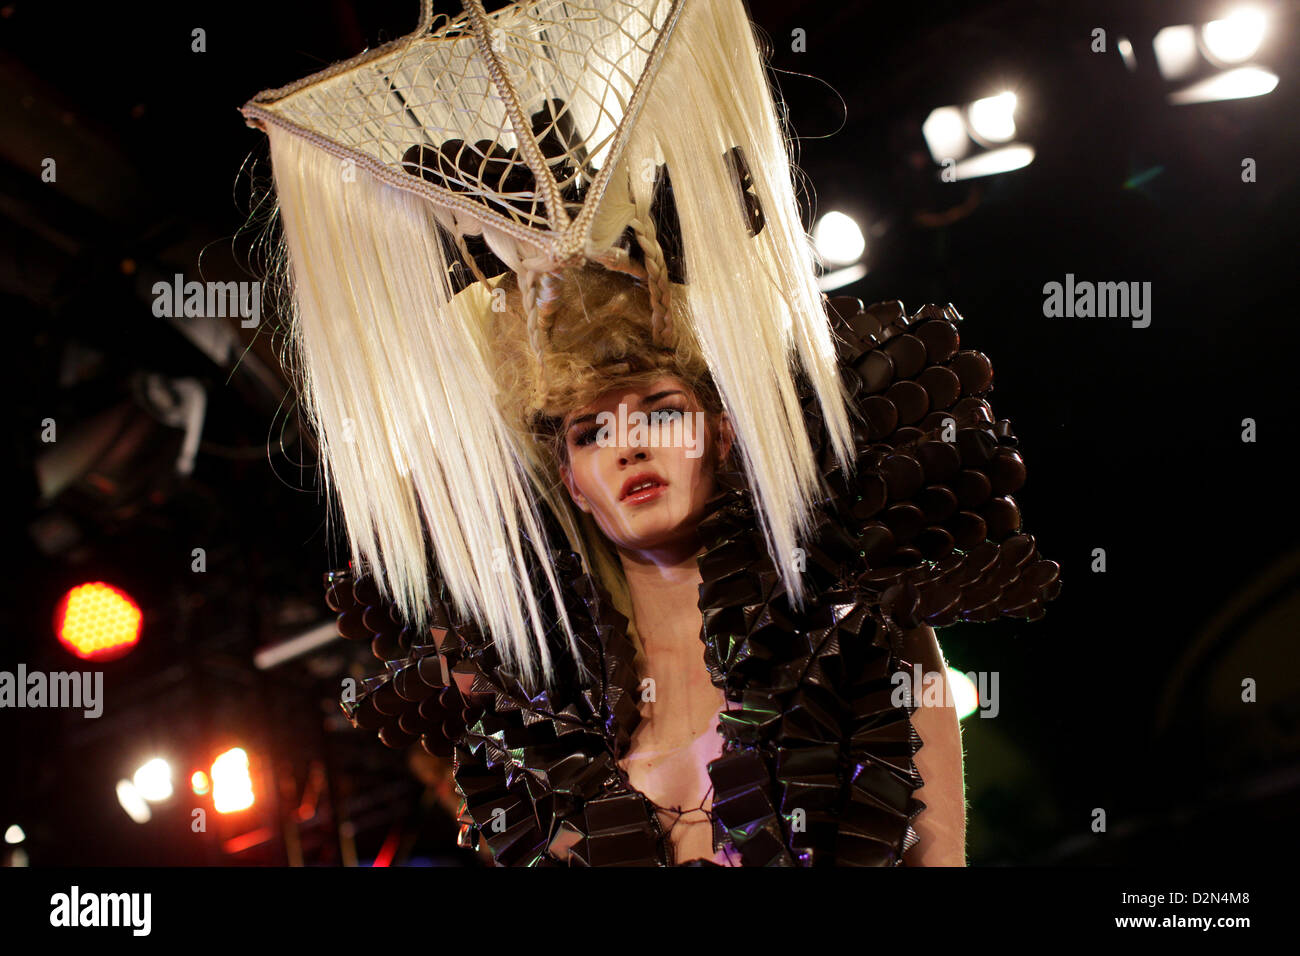 Model Luisa Hartema performs in the Alter Wartesaal during Lambertz Monday Night in Cologne, Germany, 28 January 2013. Photo: Rolf Vennenbernd Stock Photo